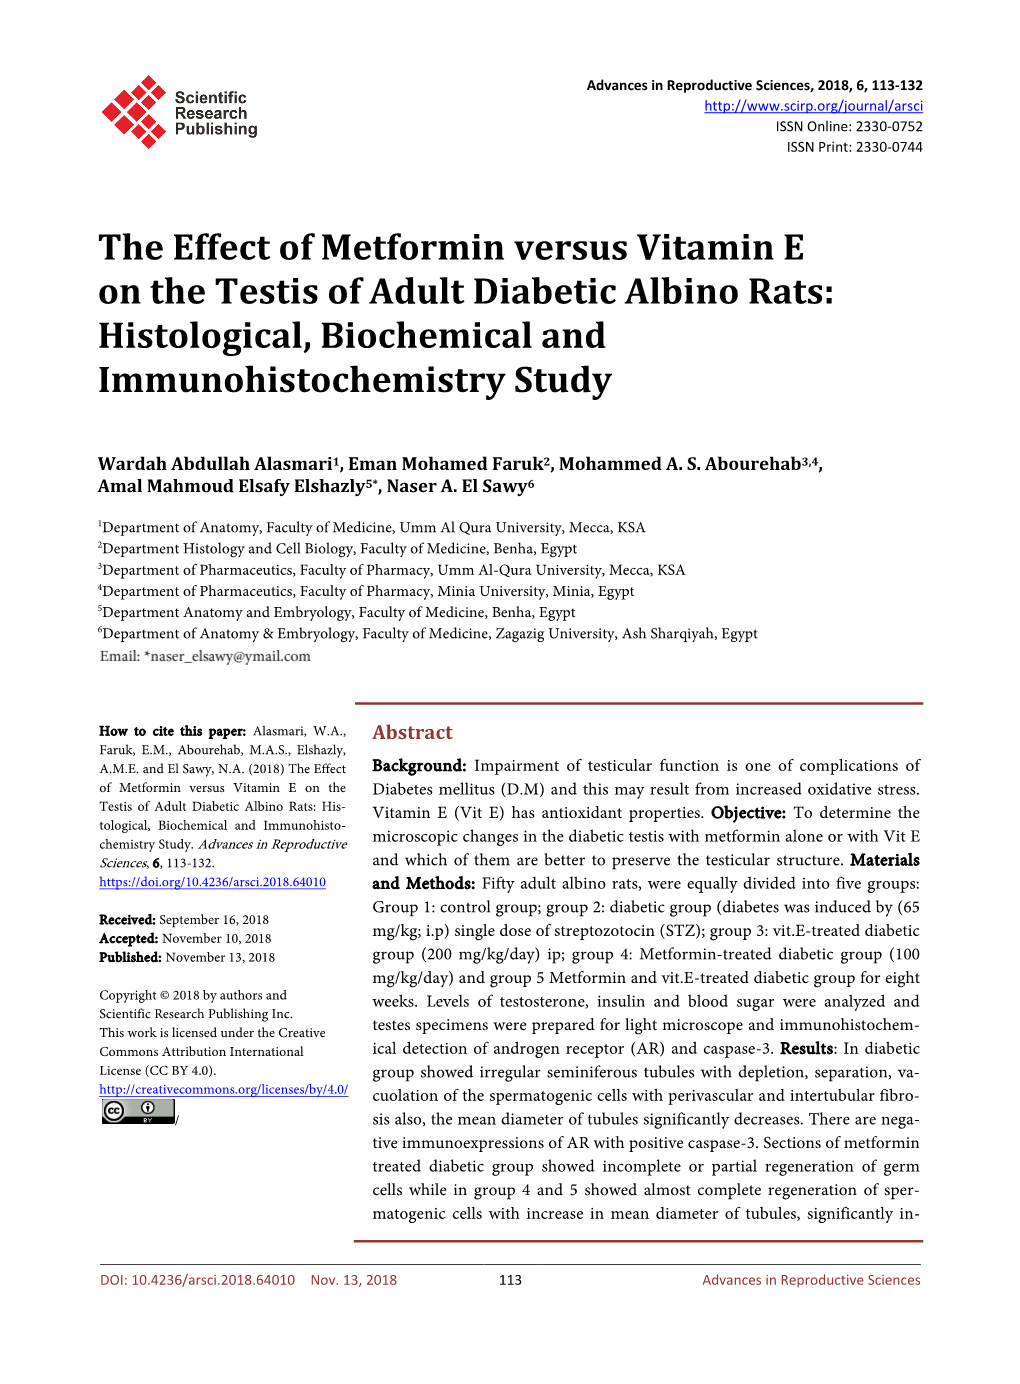 The Effect of Metformin Versus Vitamin E on the Testis of Adult Diabetic Albino Rats: Histological, Biochemical and Immunohistochemistry Study